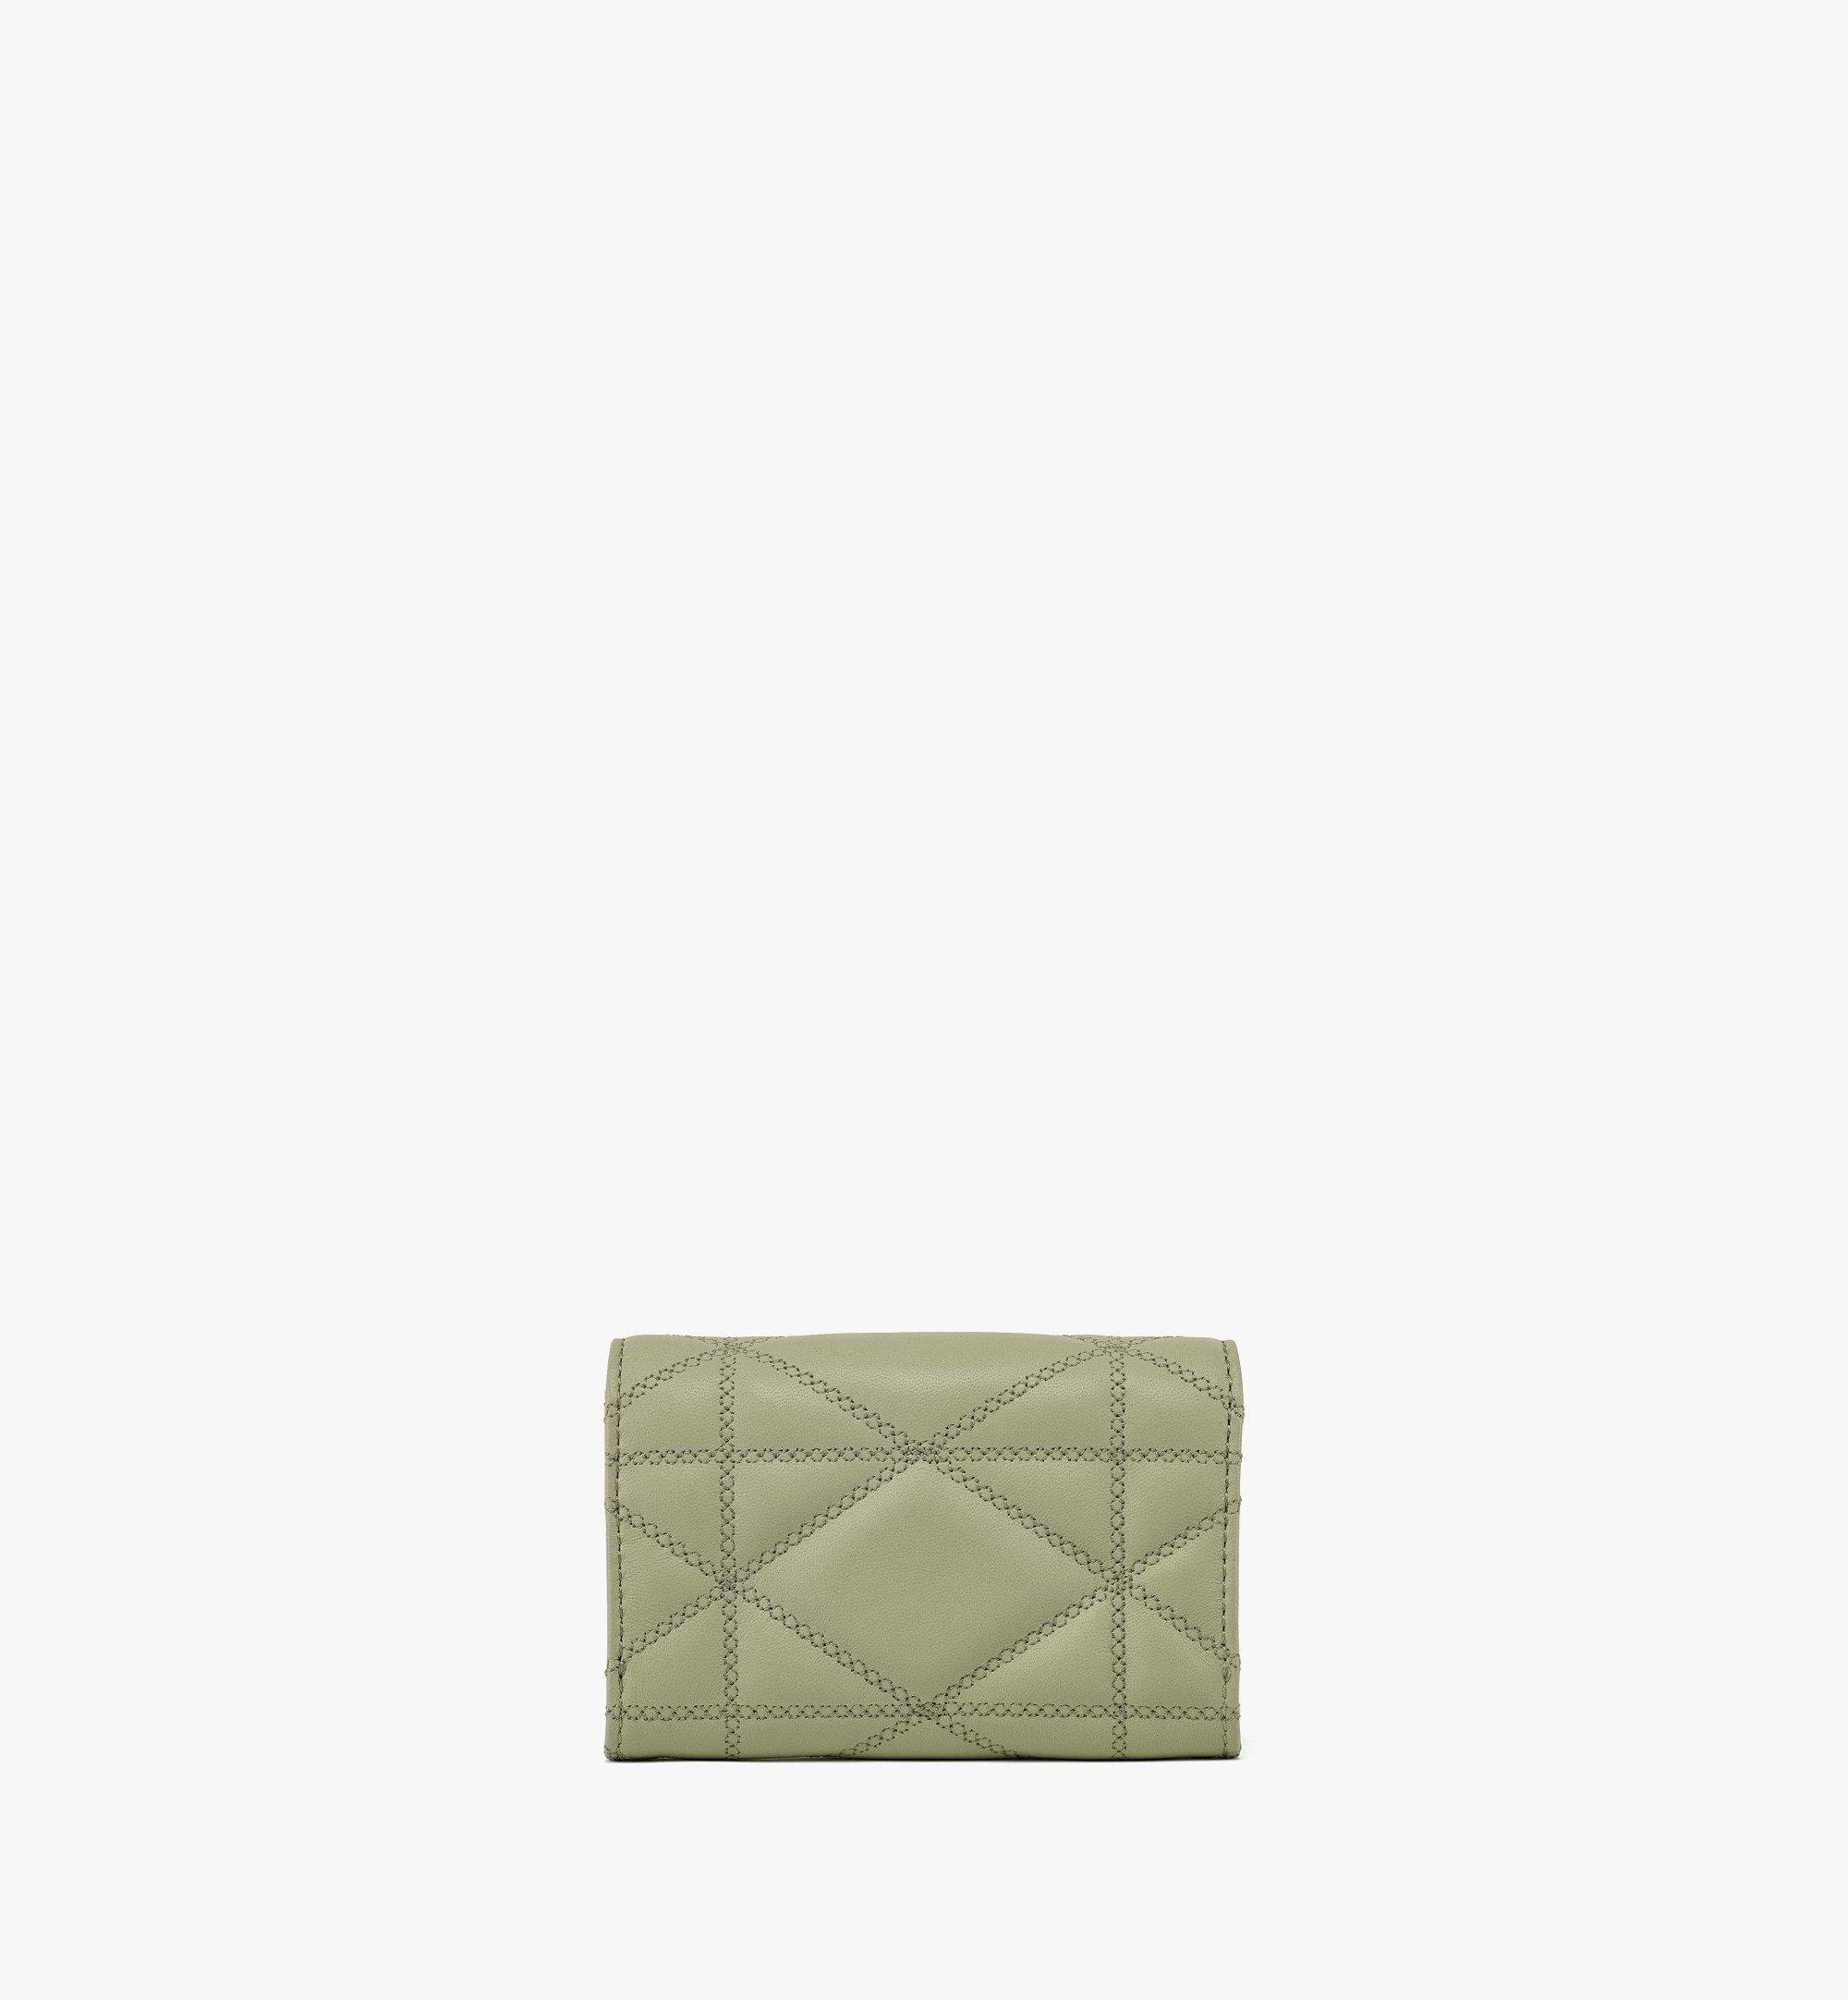 MCM Travia Card Case in Cloud Quilted Leather Green MYADSLM01J3001 Alternate View 2